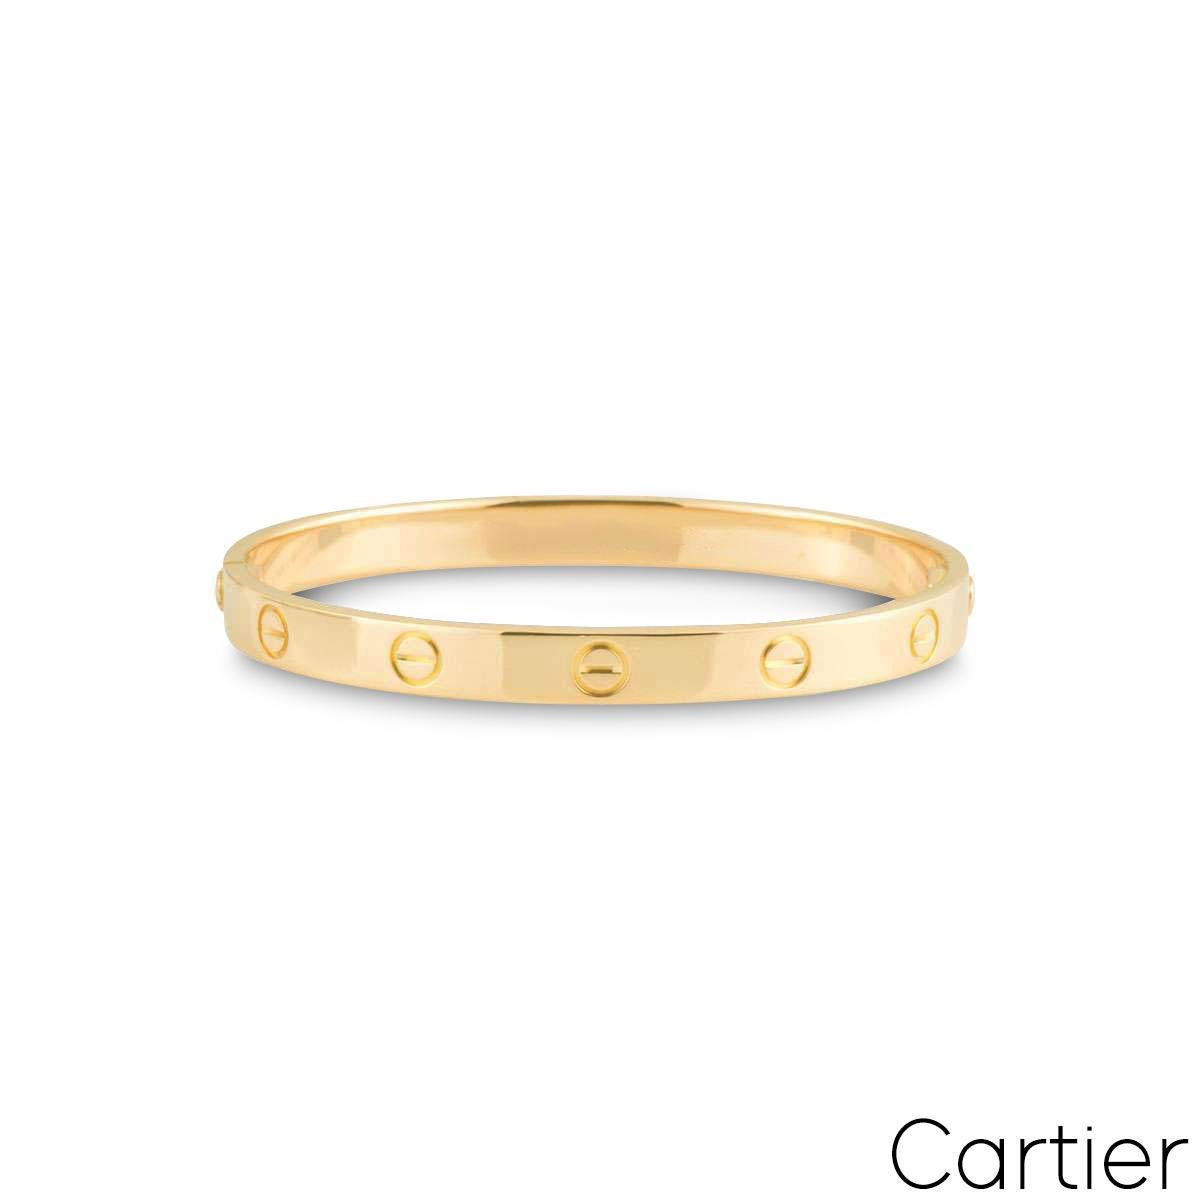 A signature 18k yellow gold Cartier bracelet from the Love collection. The bracelet has the iconic screw motif design displayed around the outer edge and features the new style screw fitting. This bracelet has a gross weight 37.6 grams and is a size